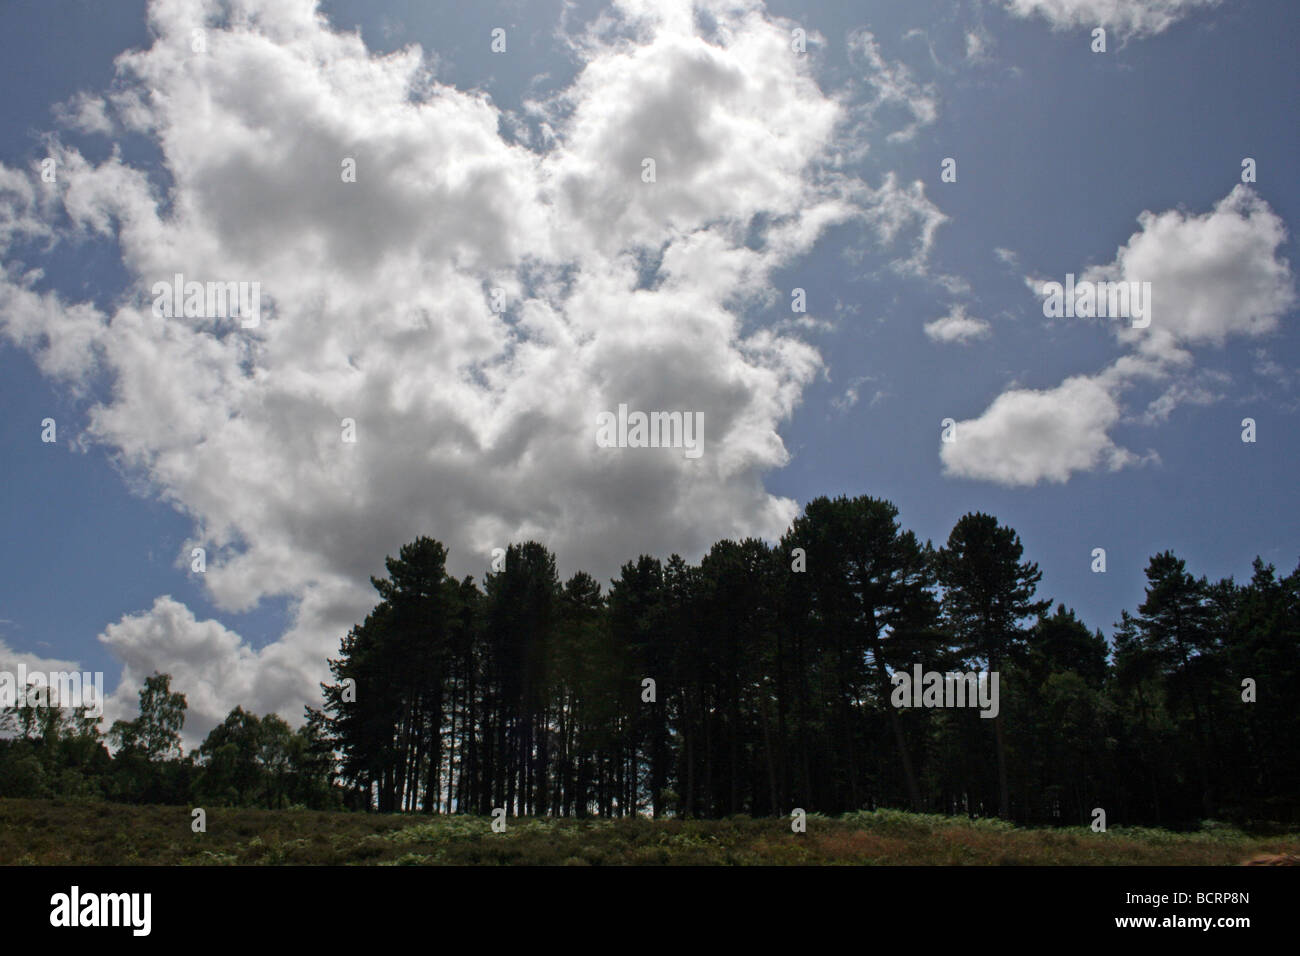 Billowing Clouds Over A Stand Of Scots Pine Trees Pinus sylvestris On Cannock Chase, England, UK Stock Photo